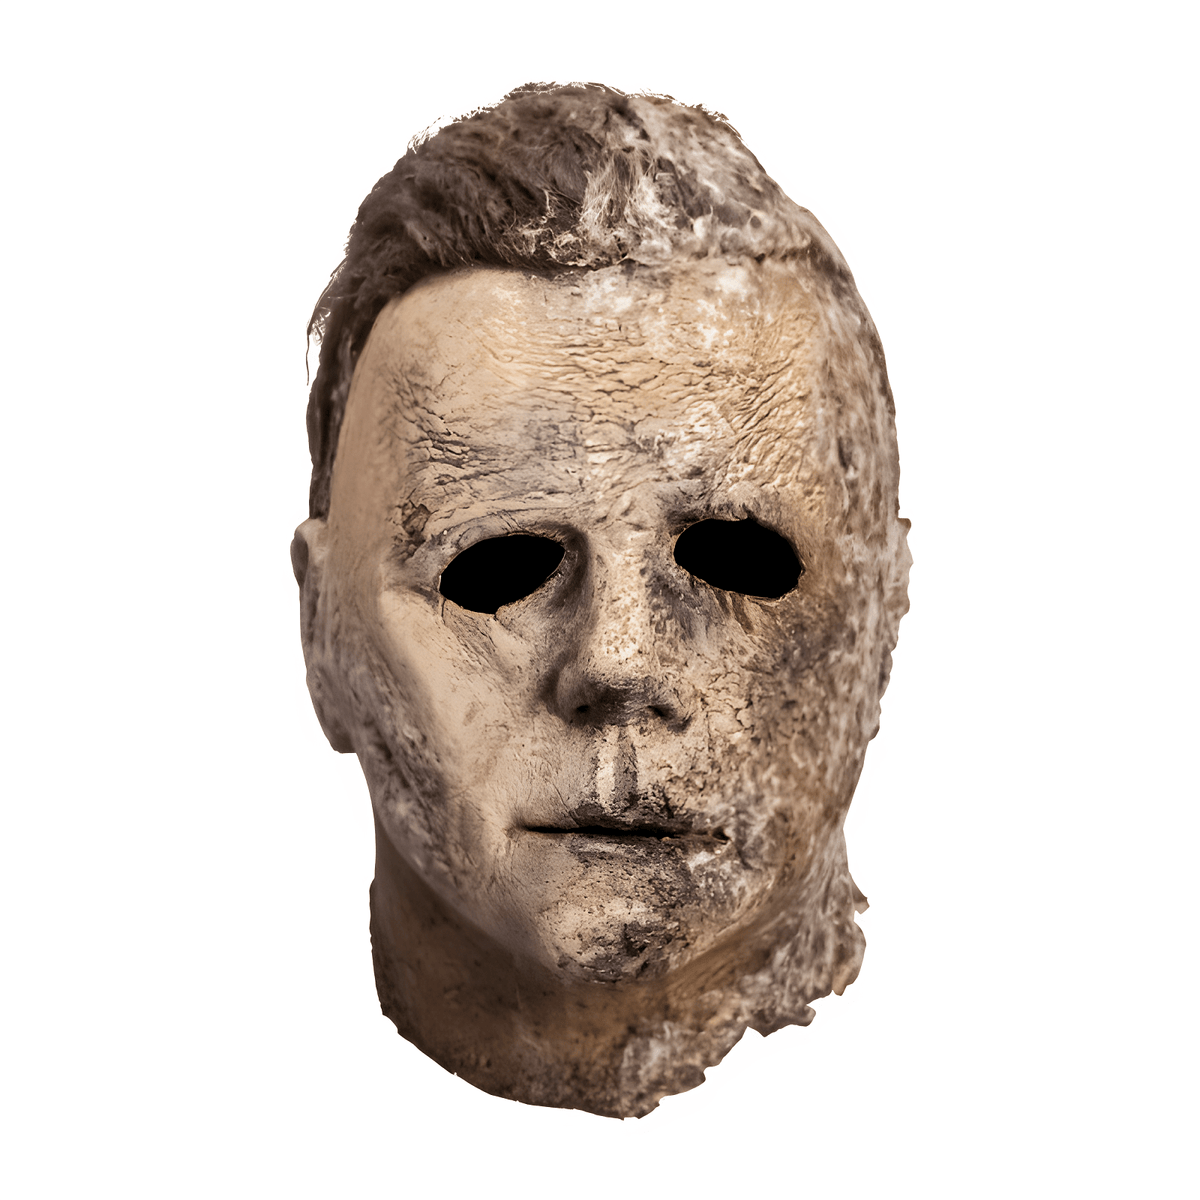 TRICK OR TREAT STUDIOS INC Costume Accessories Halloween Ends Michael Myers Mask 811501039419